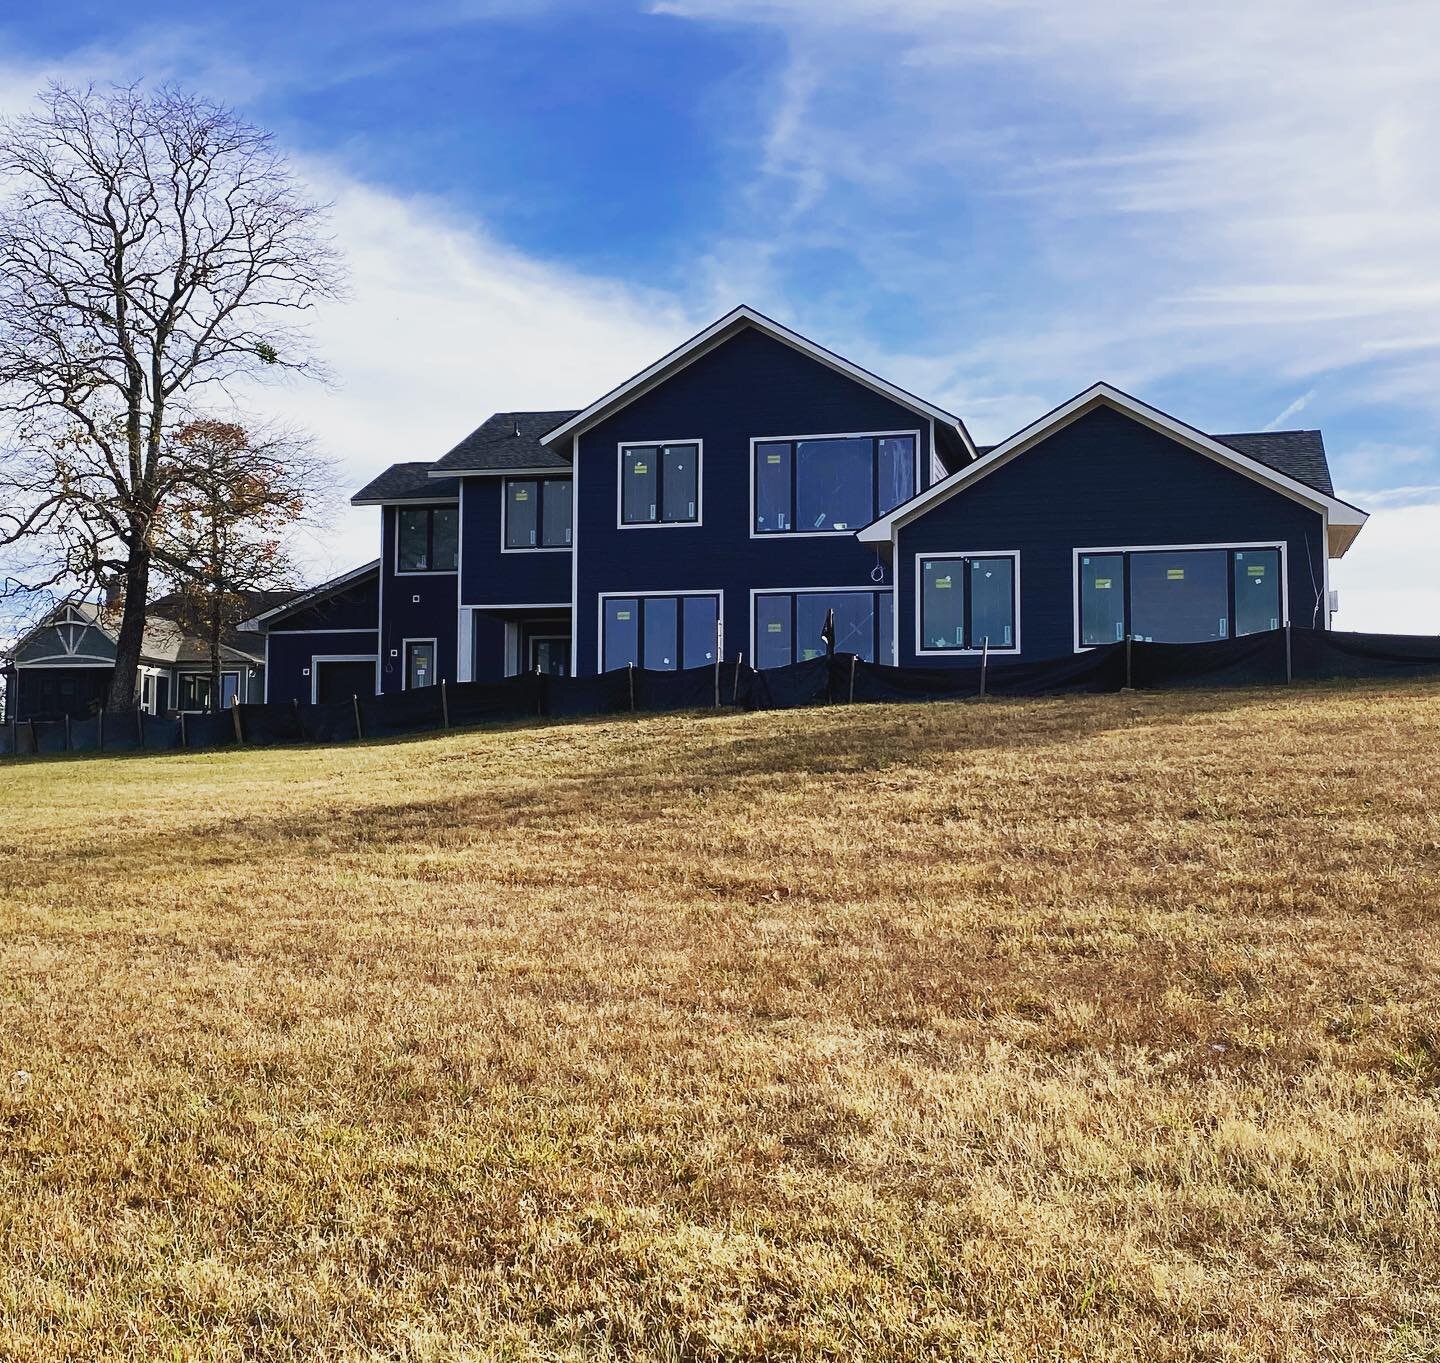 Wrapping up one of our custom home projects located in Sharps Chapel, TN just outside of Knoxville on #norrislake 
.
.
.
#marcogradydesign #norrislake #norrislakelife #norrislaketennessee #sharpschapel #customhomes